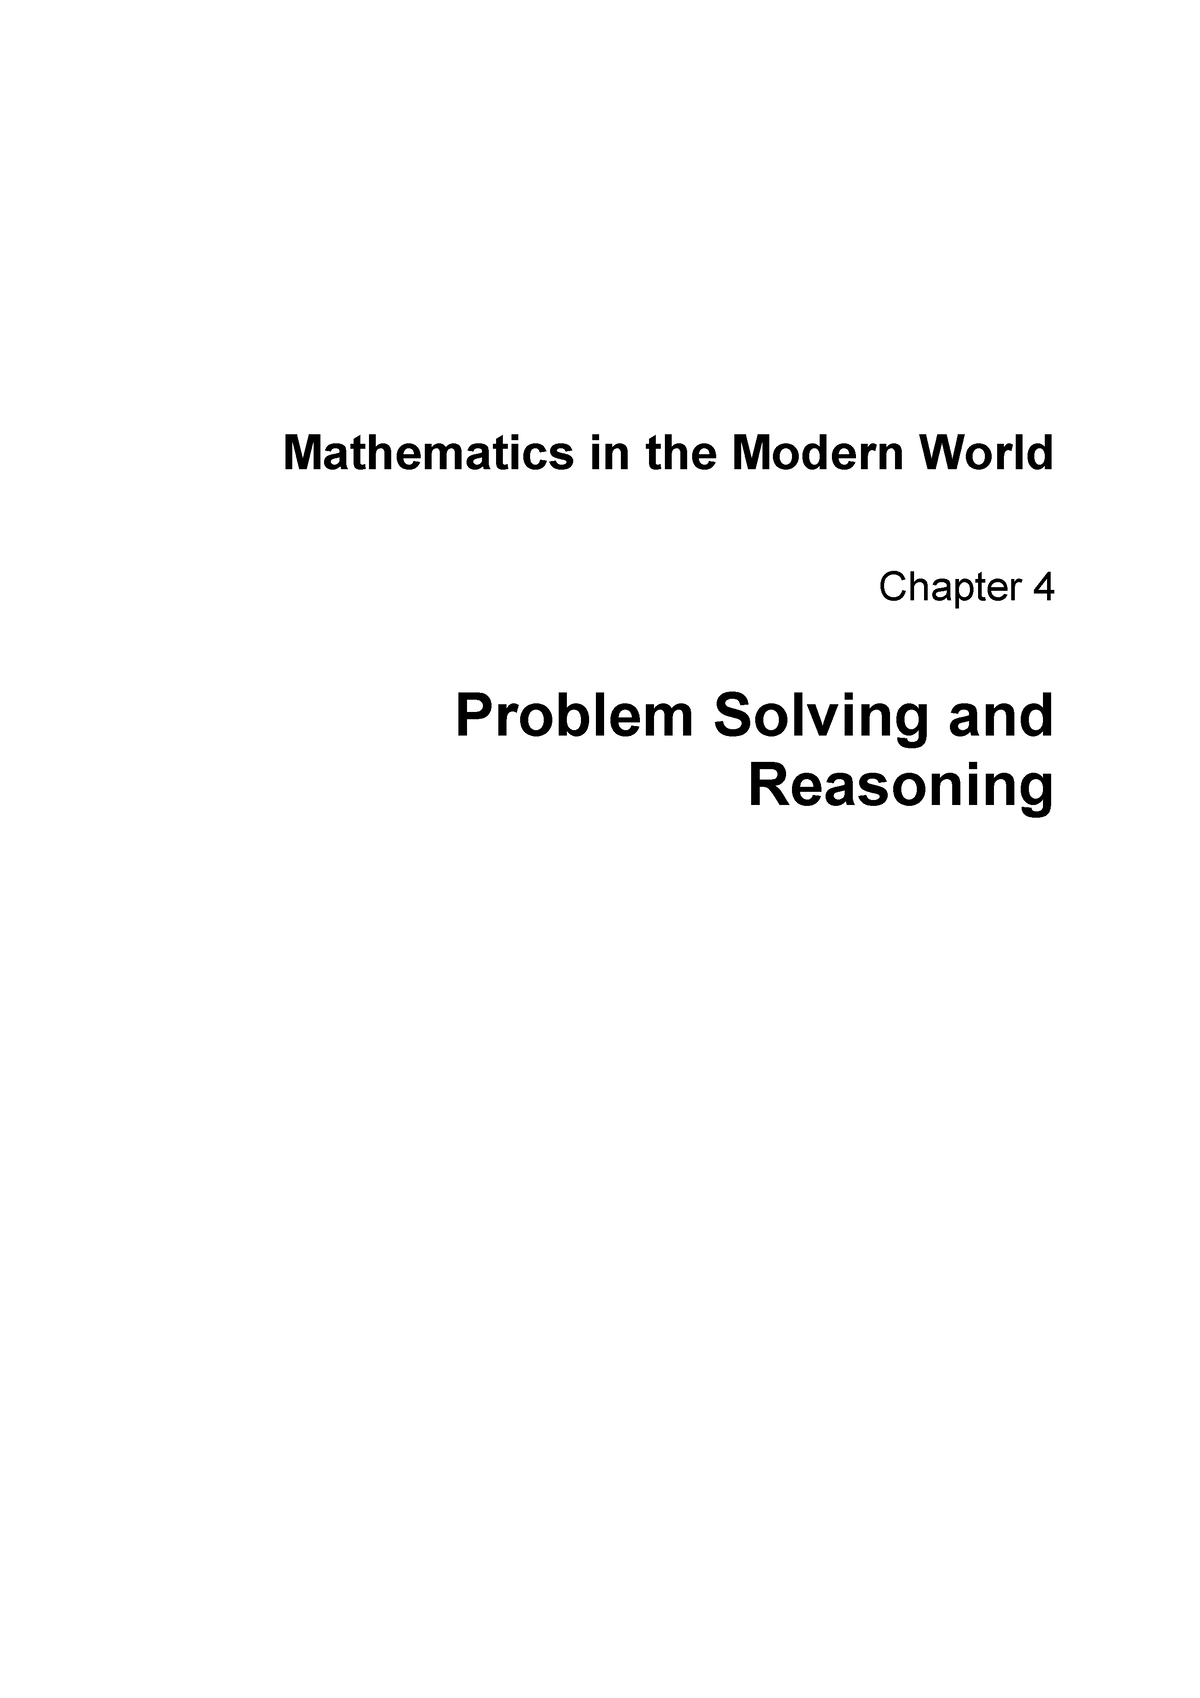 problem solving and reasoning in mathematics in modern world example